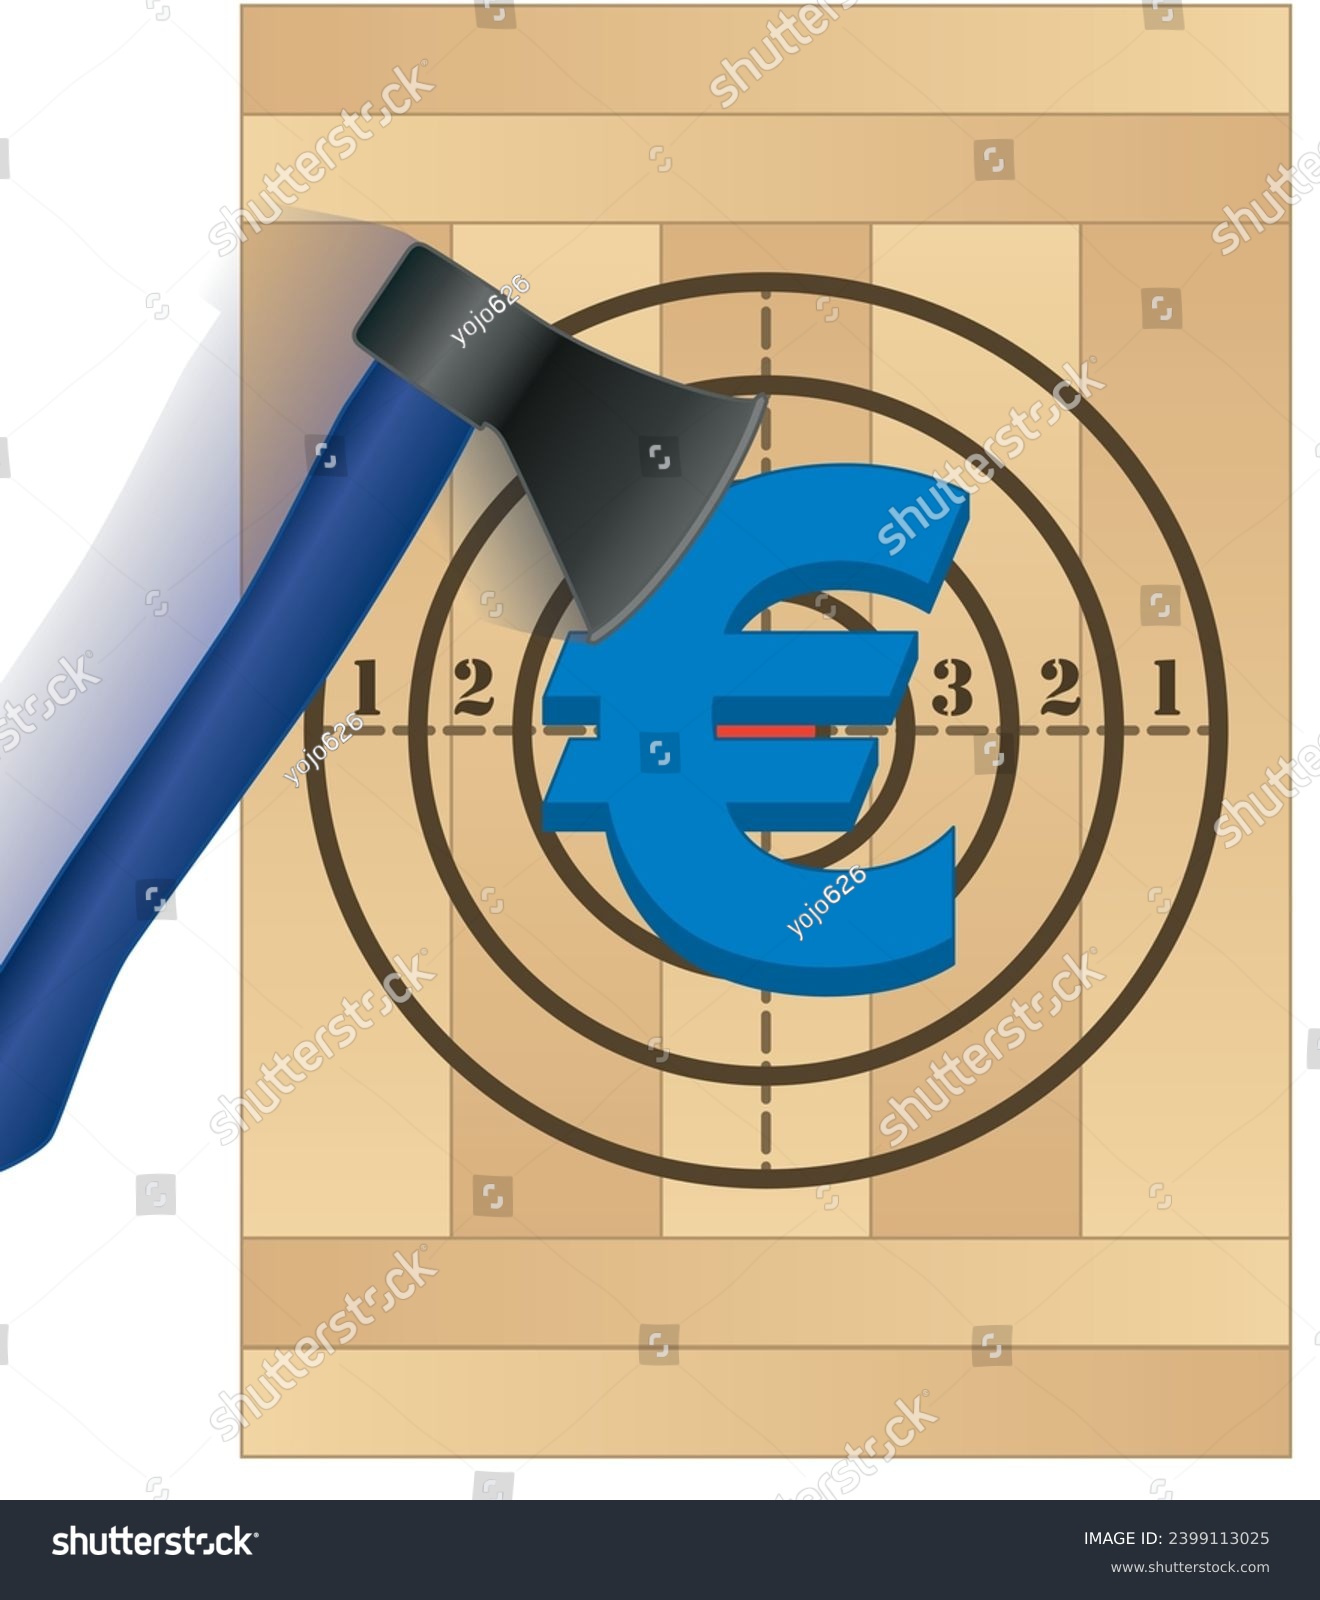 SVG of business, axe throwing showing motion aimed at euro sign on target svg